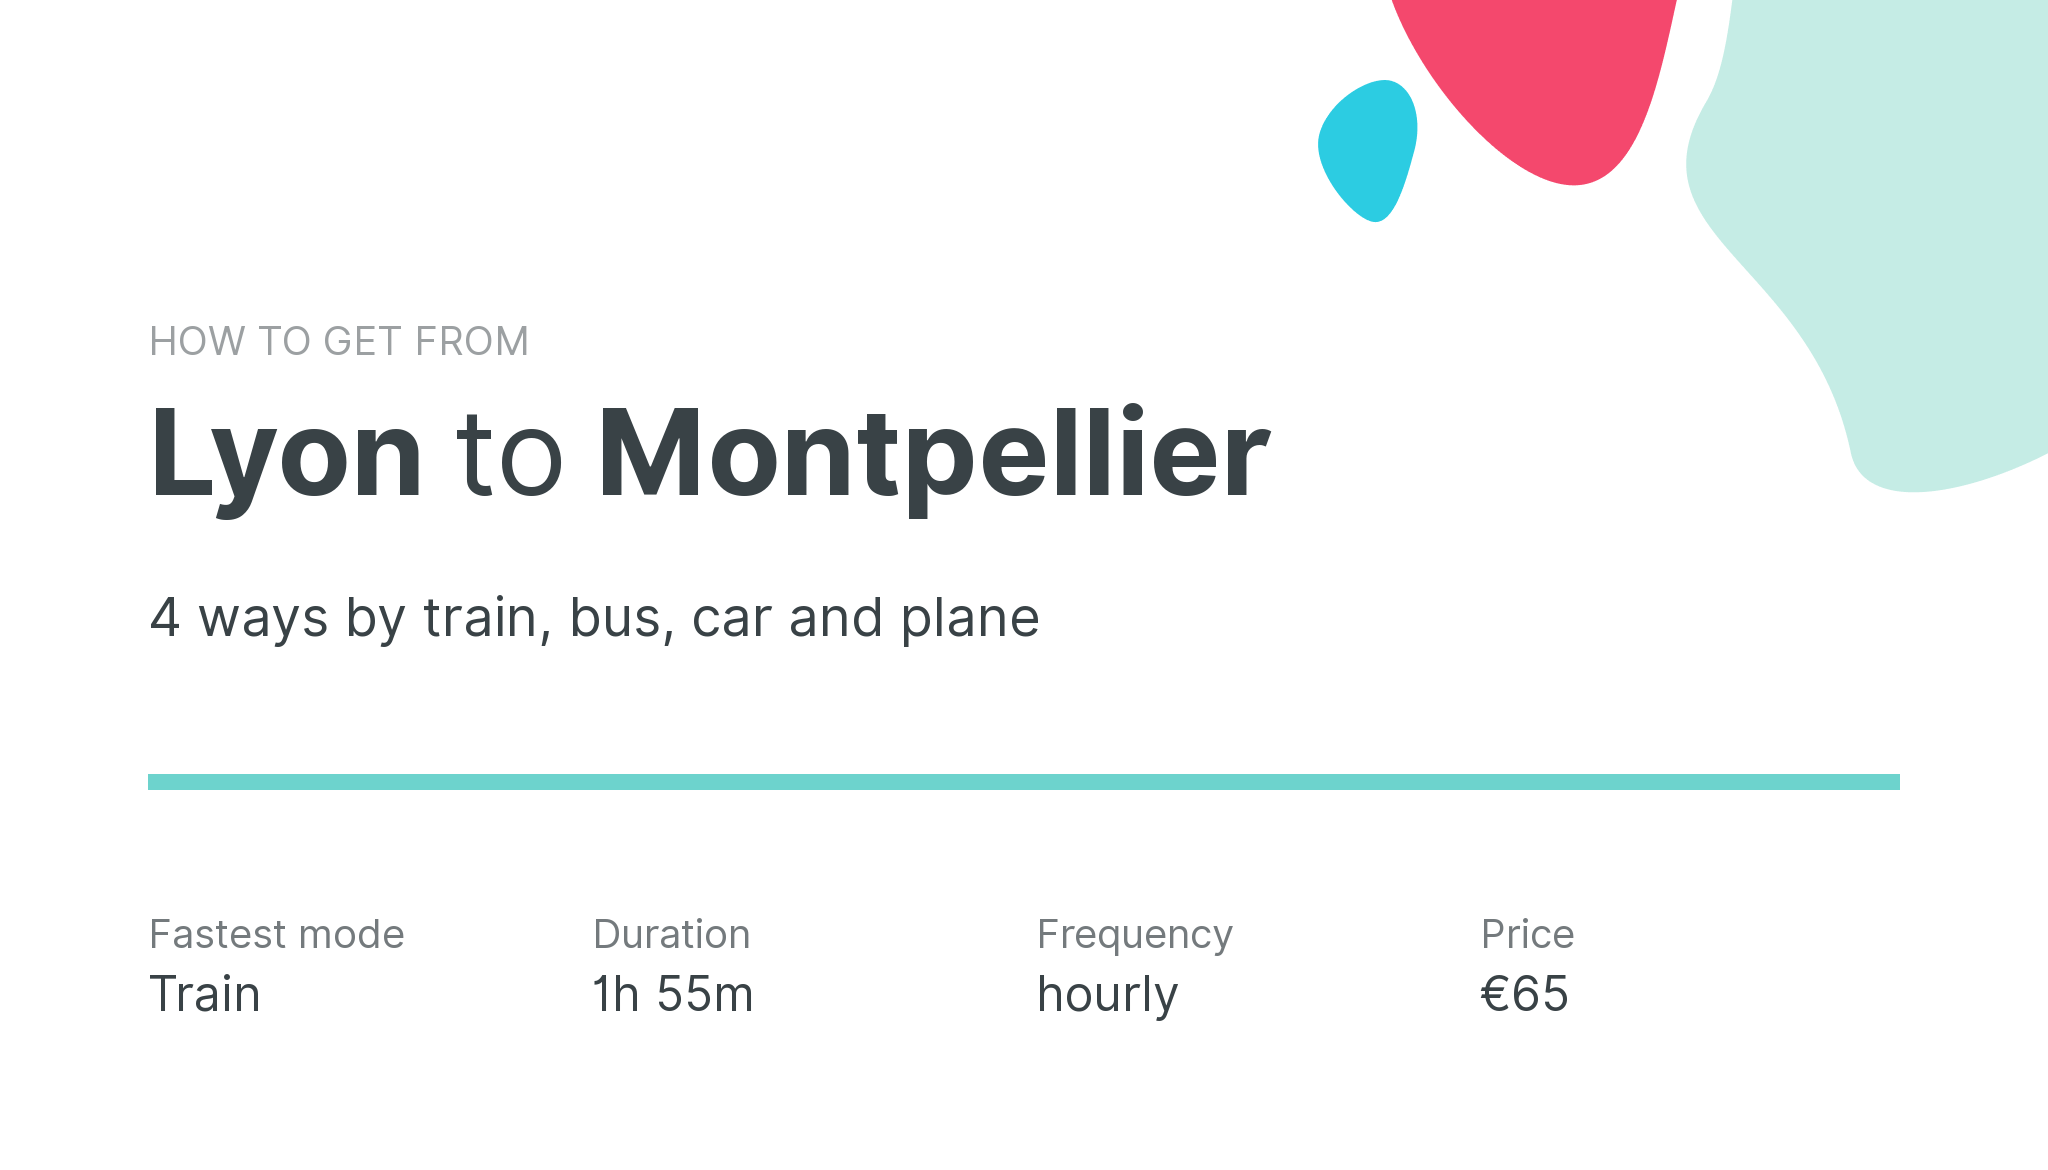 How do I get from Lyon to Montpellier